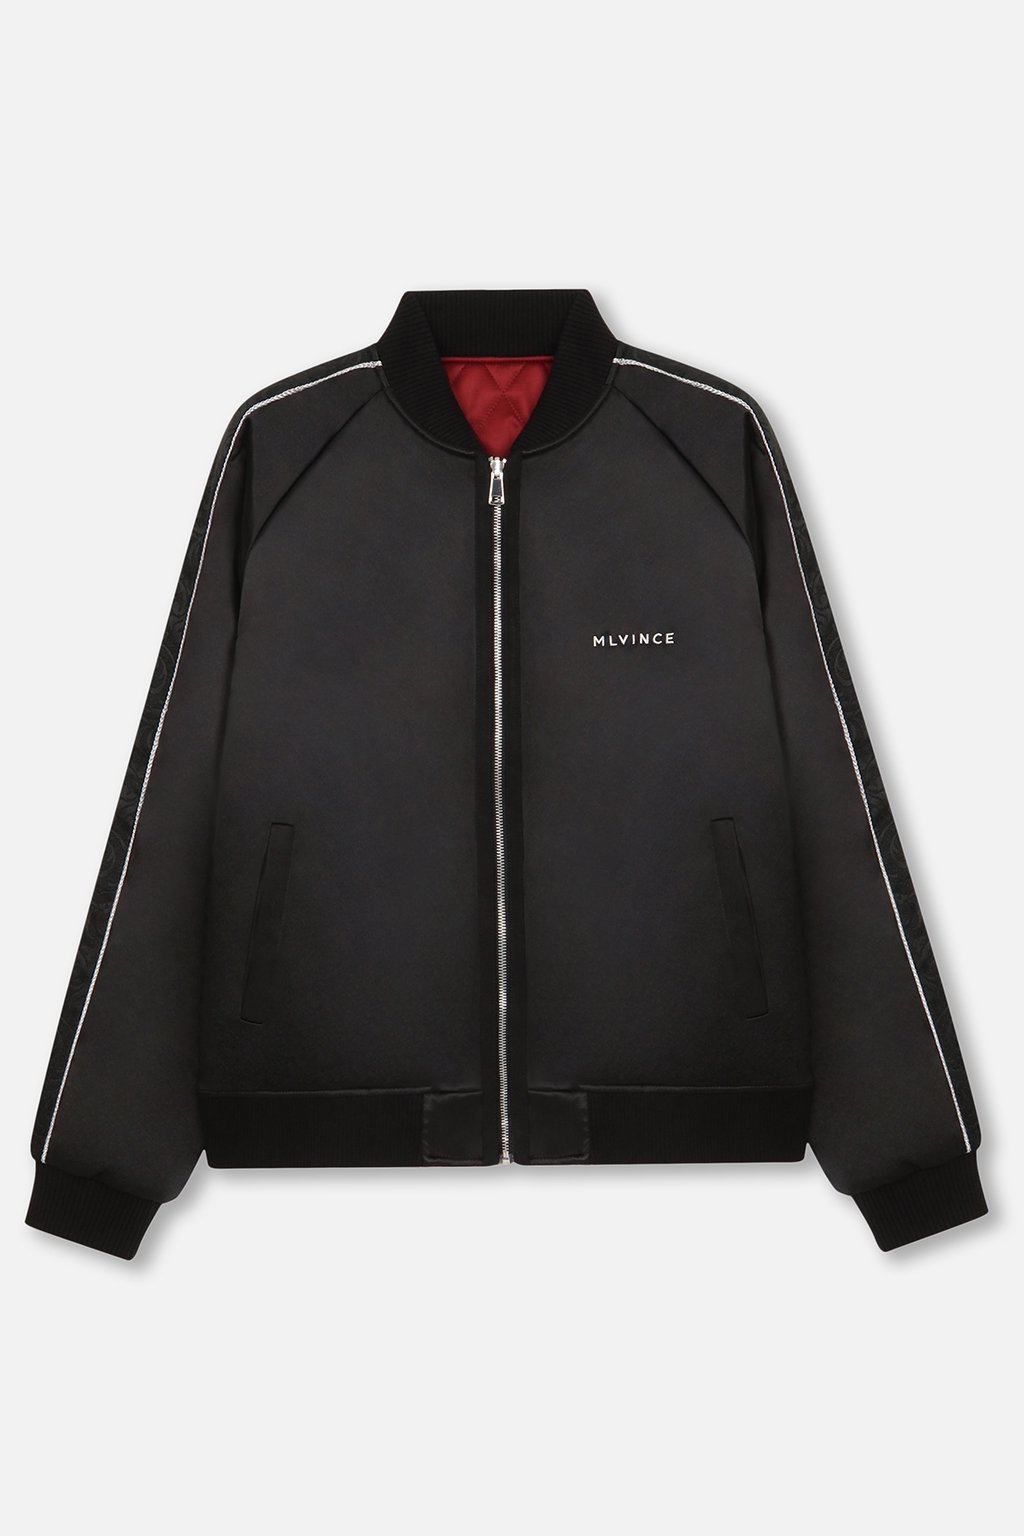 60%OFF MLVINCE (メルヴィンス) | QUILTED SOUVENIR JACKET BLACK